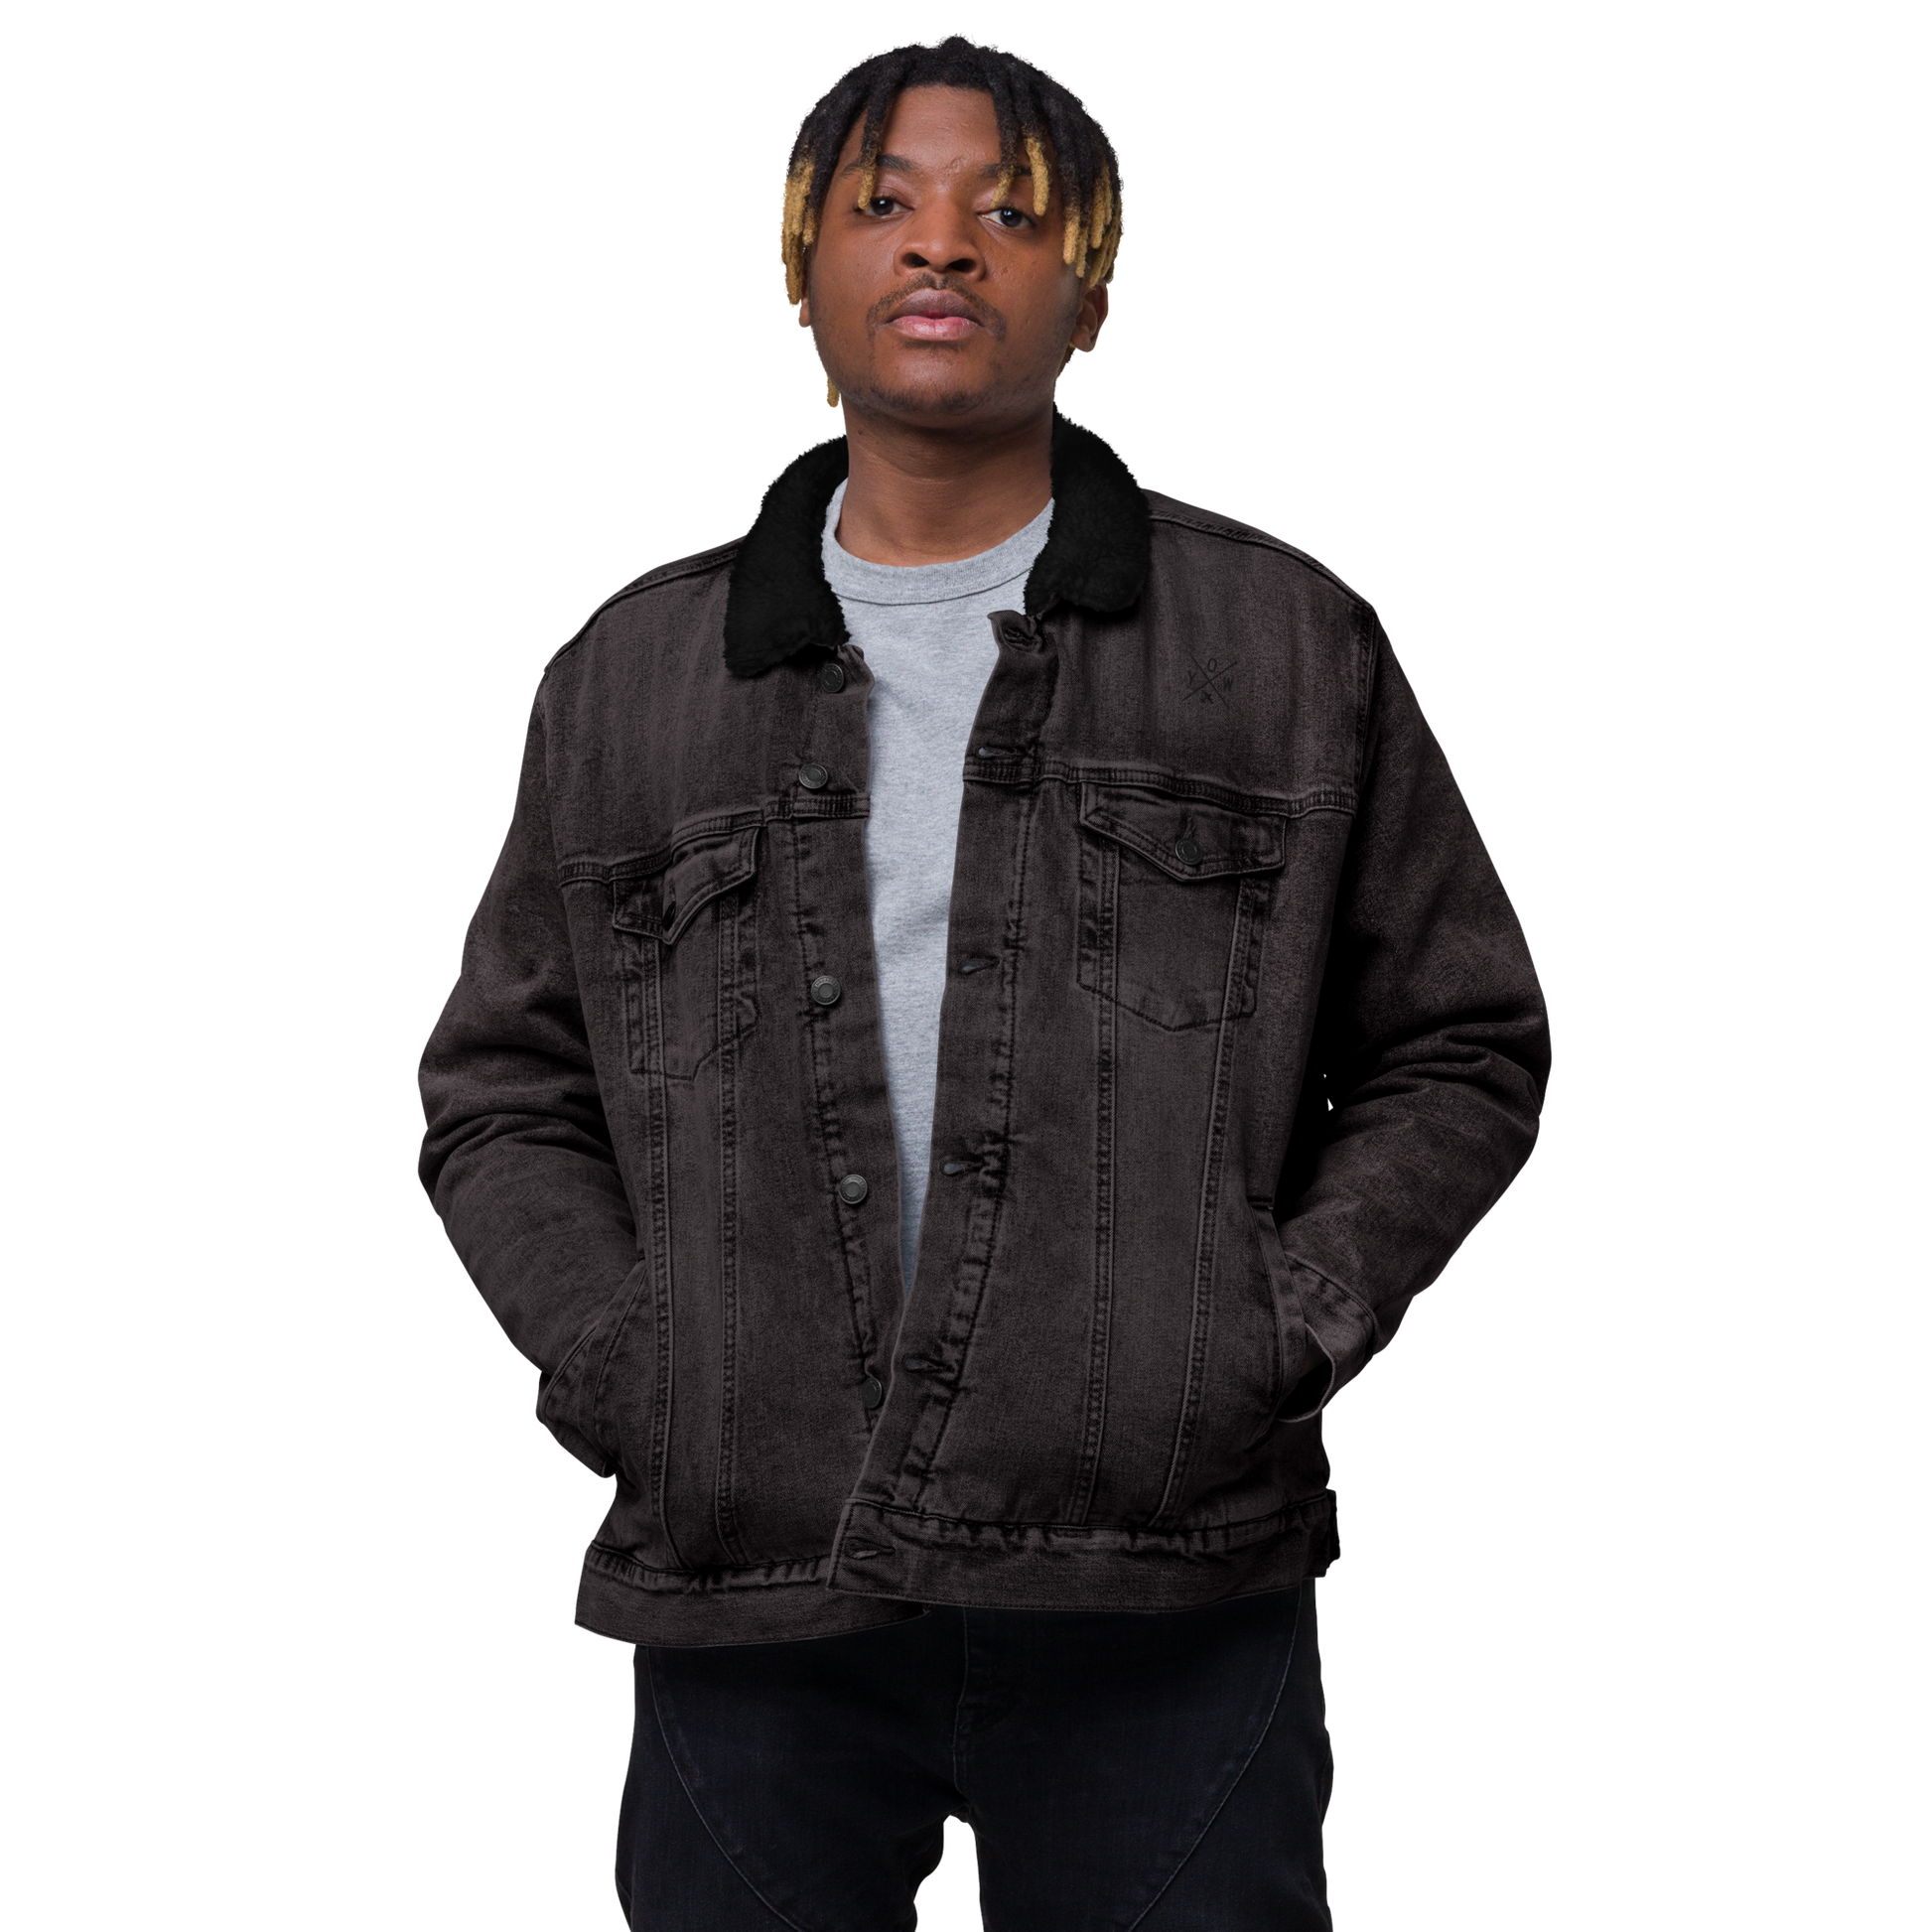 YHM Designs - YOW Ottawa Denim Sherpa Jacket - Crossed-X Design with Airport Code and Vintage Propliner - Black & White Embroidery - Image 01